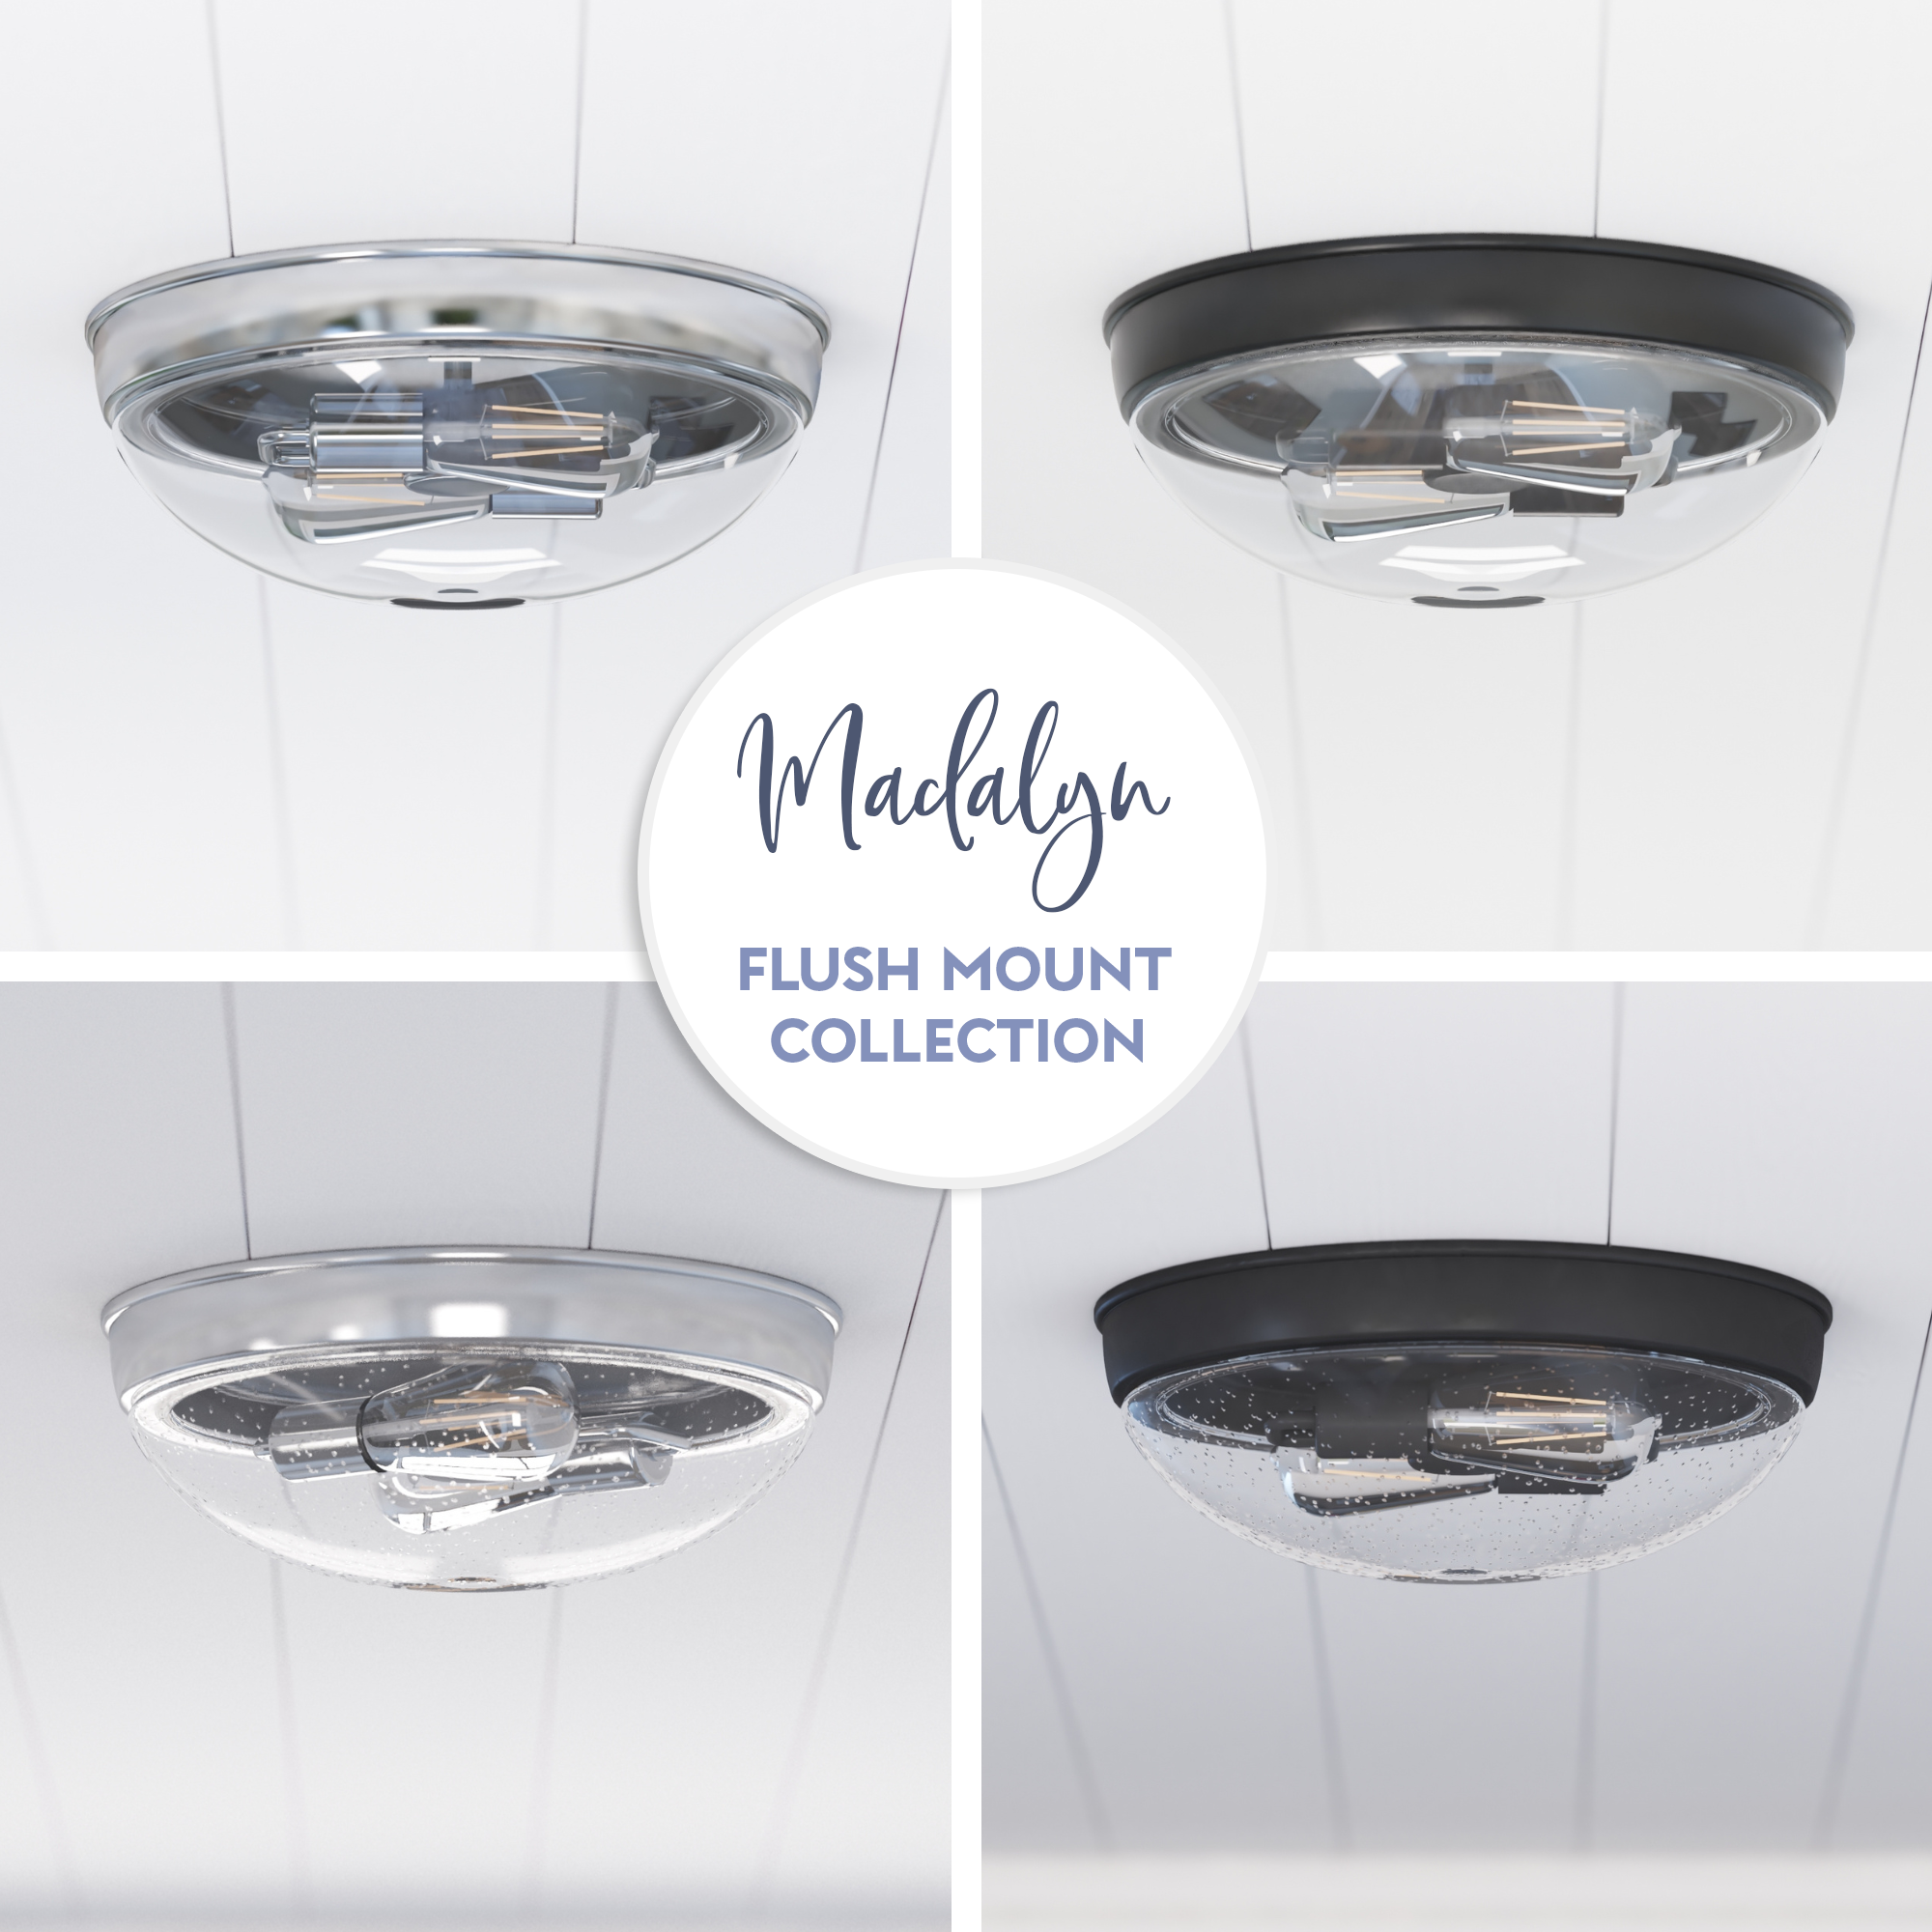 Madalyn, Dome Flushmount Light Fixture, Clear Seeded Glass, Espresso by Prominence Home